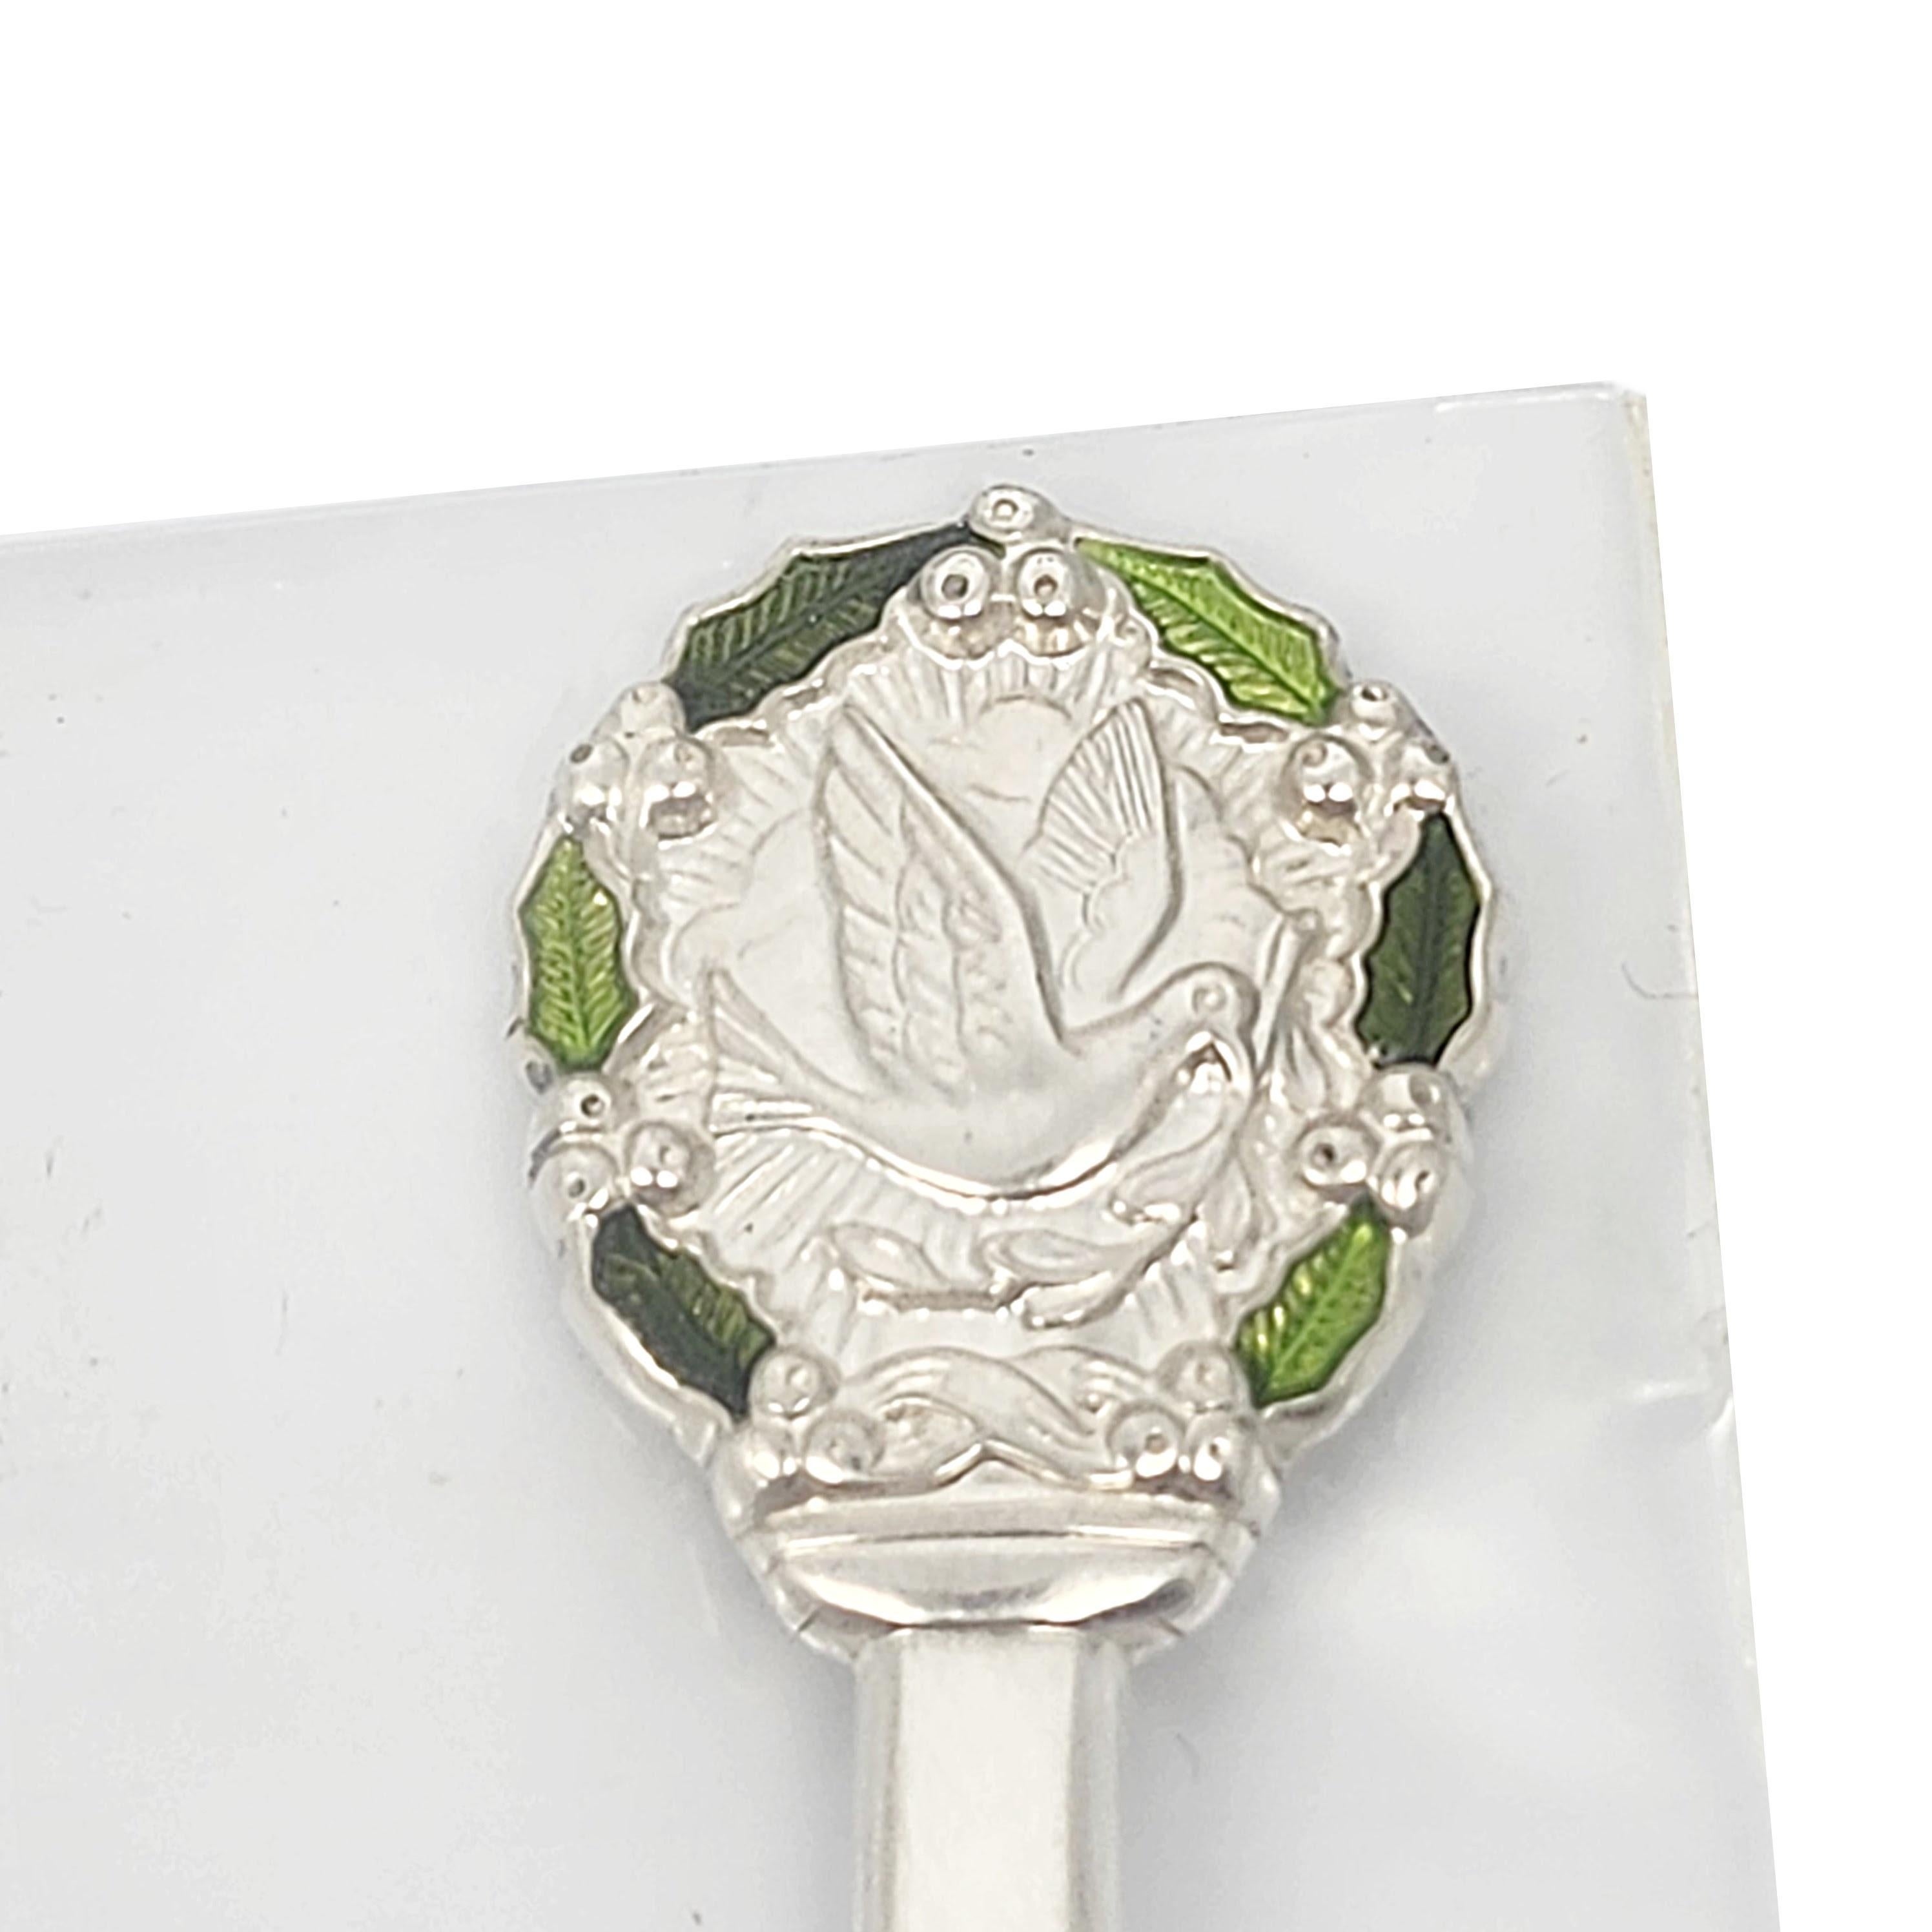 Women's or Men's Gorham Sterling Silver 1977 Christmas Spoon Sealed with Box #15798 For Sale